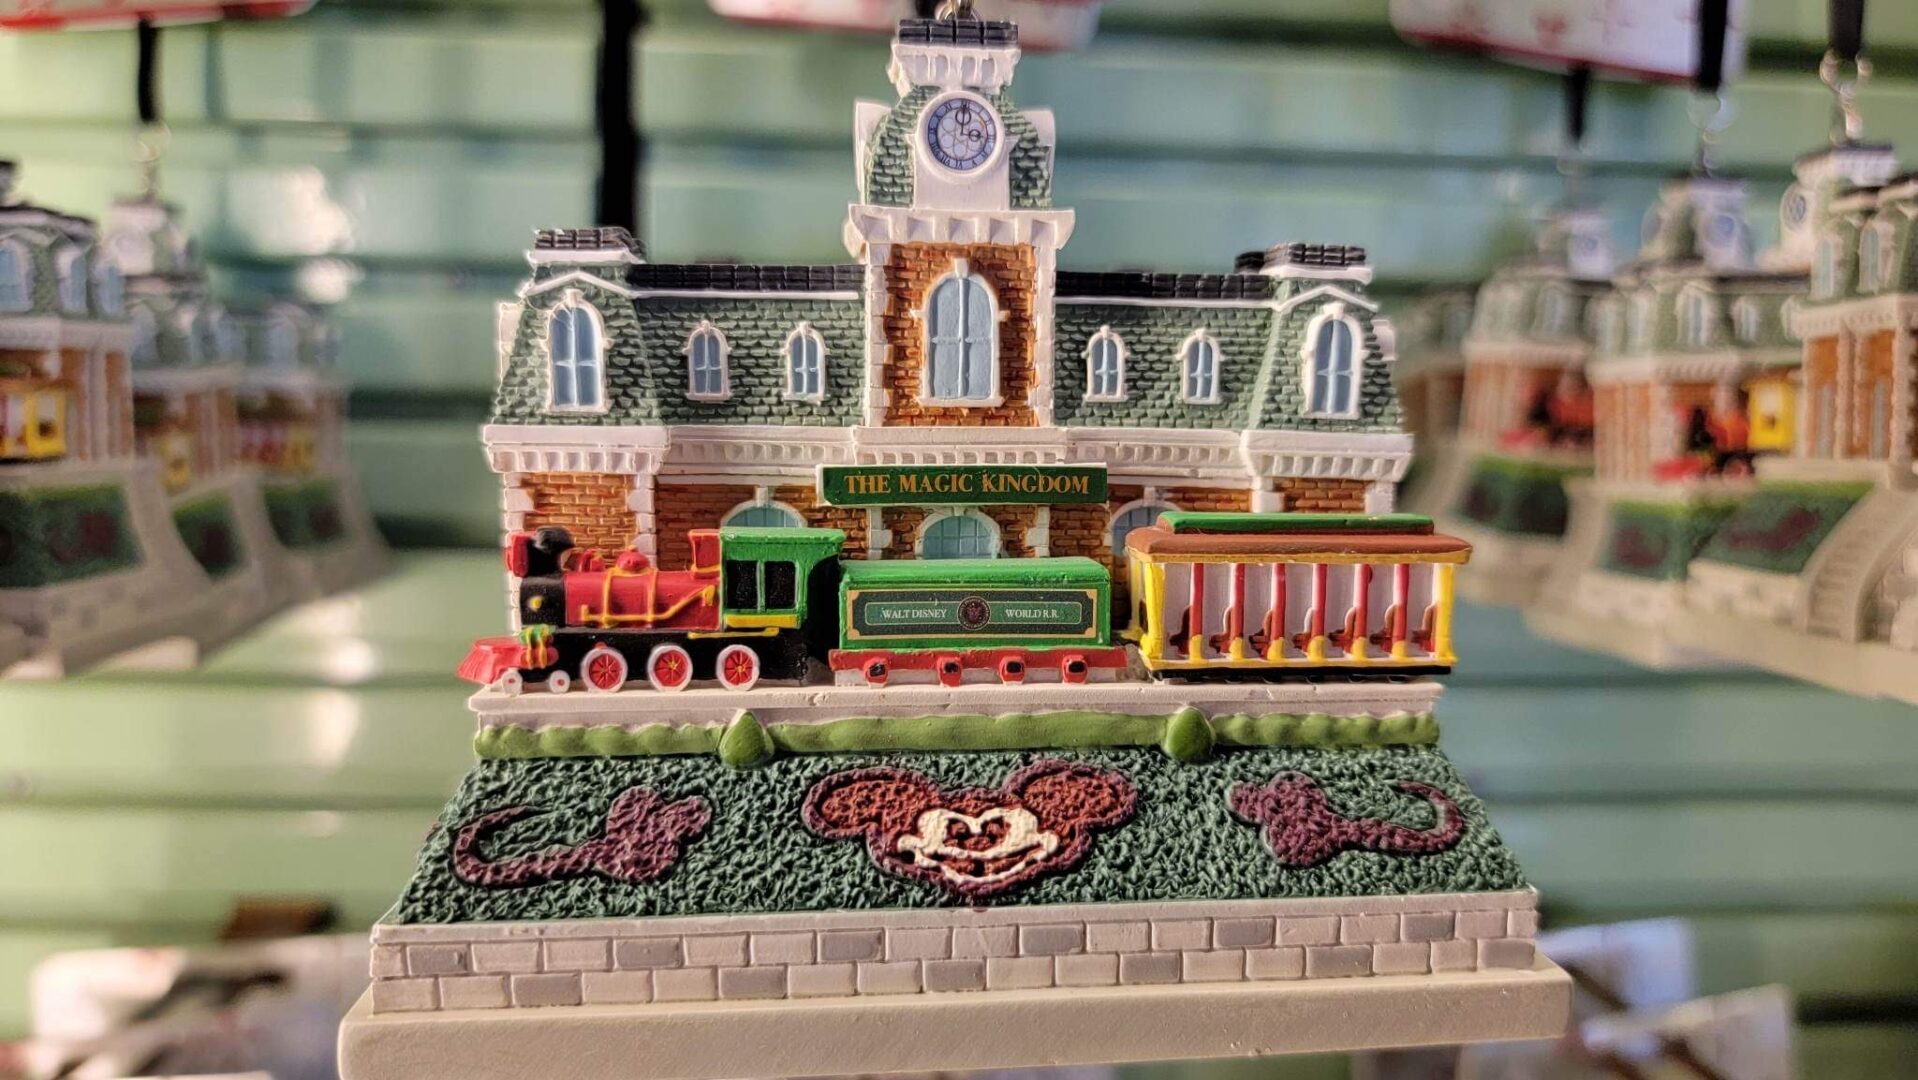 Classic Magic Kingdom Sketchbook Ornament For Your Christmas Tree!